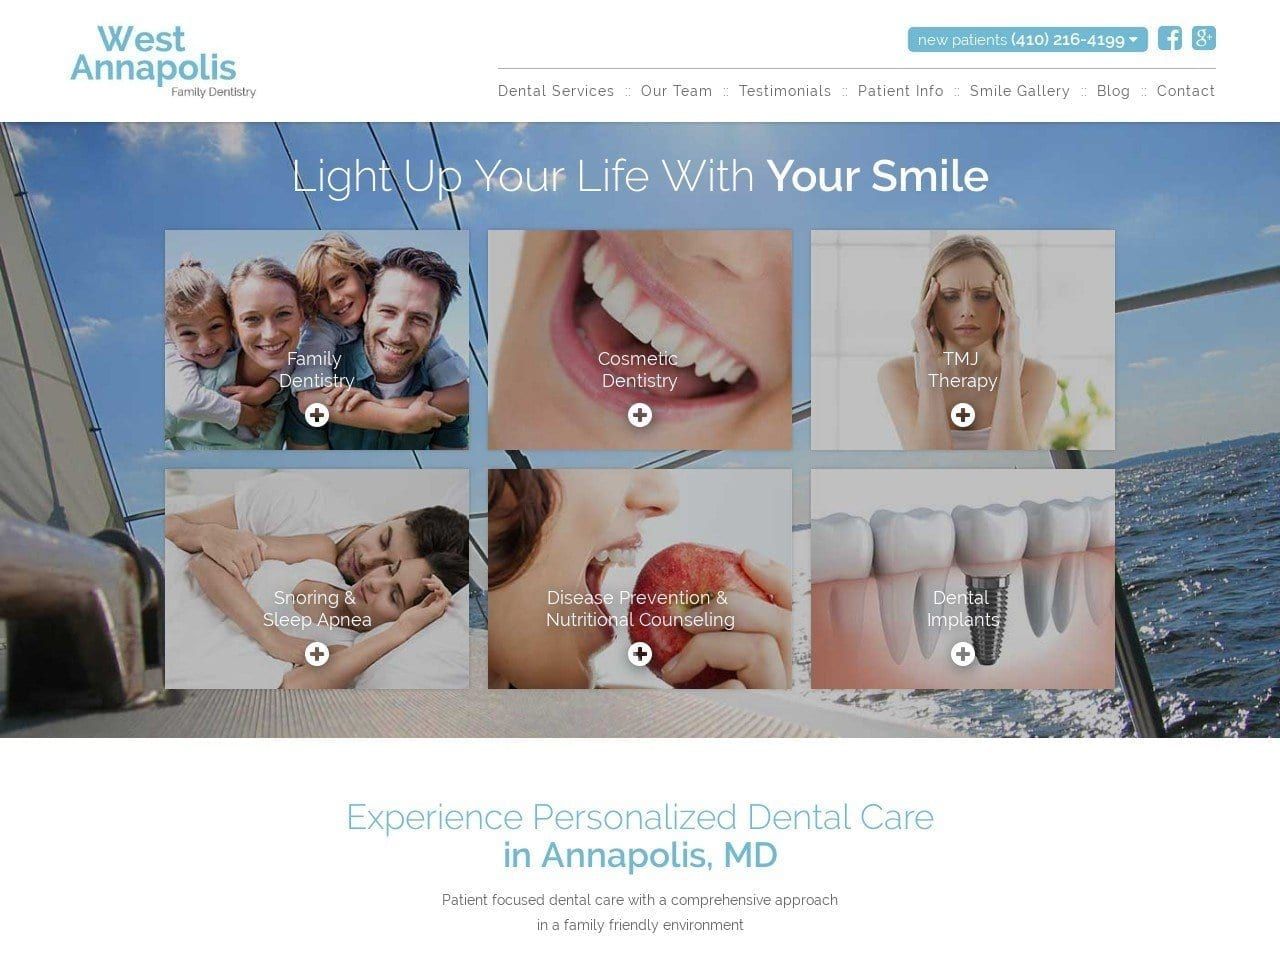 West Annapolis Family Dentistry Colucciello Maria Website Screenshot from westannapolisfamilydentistry.com